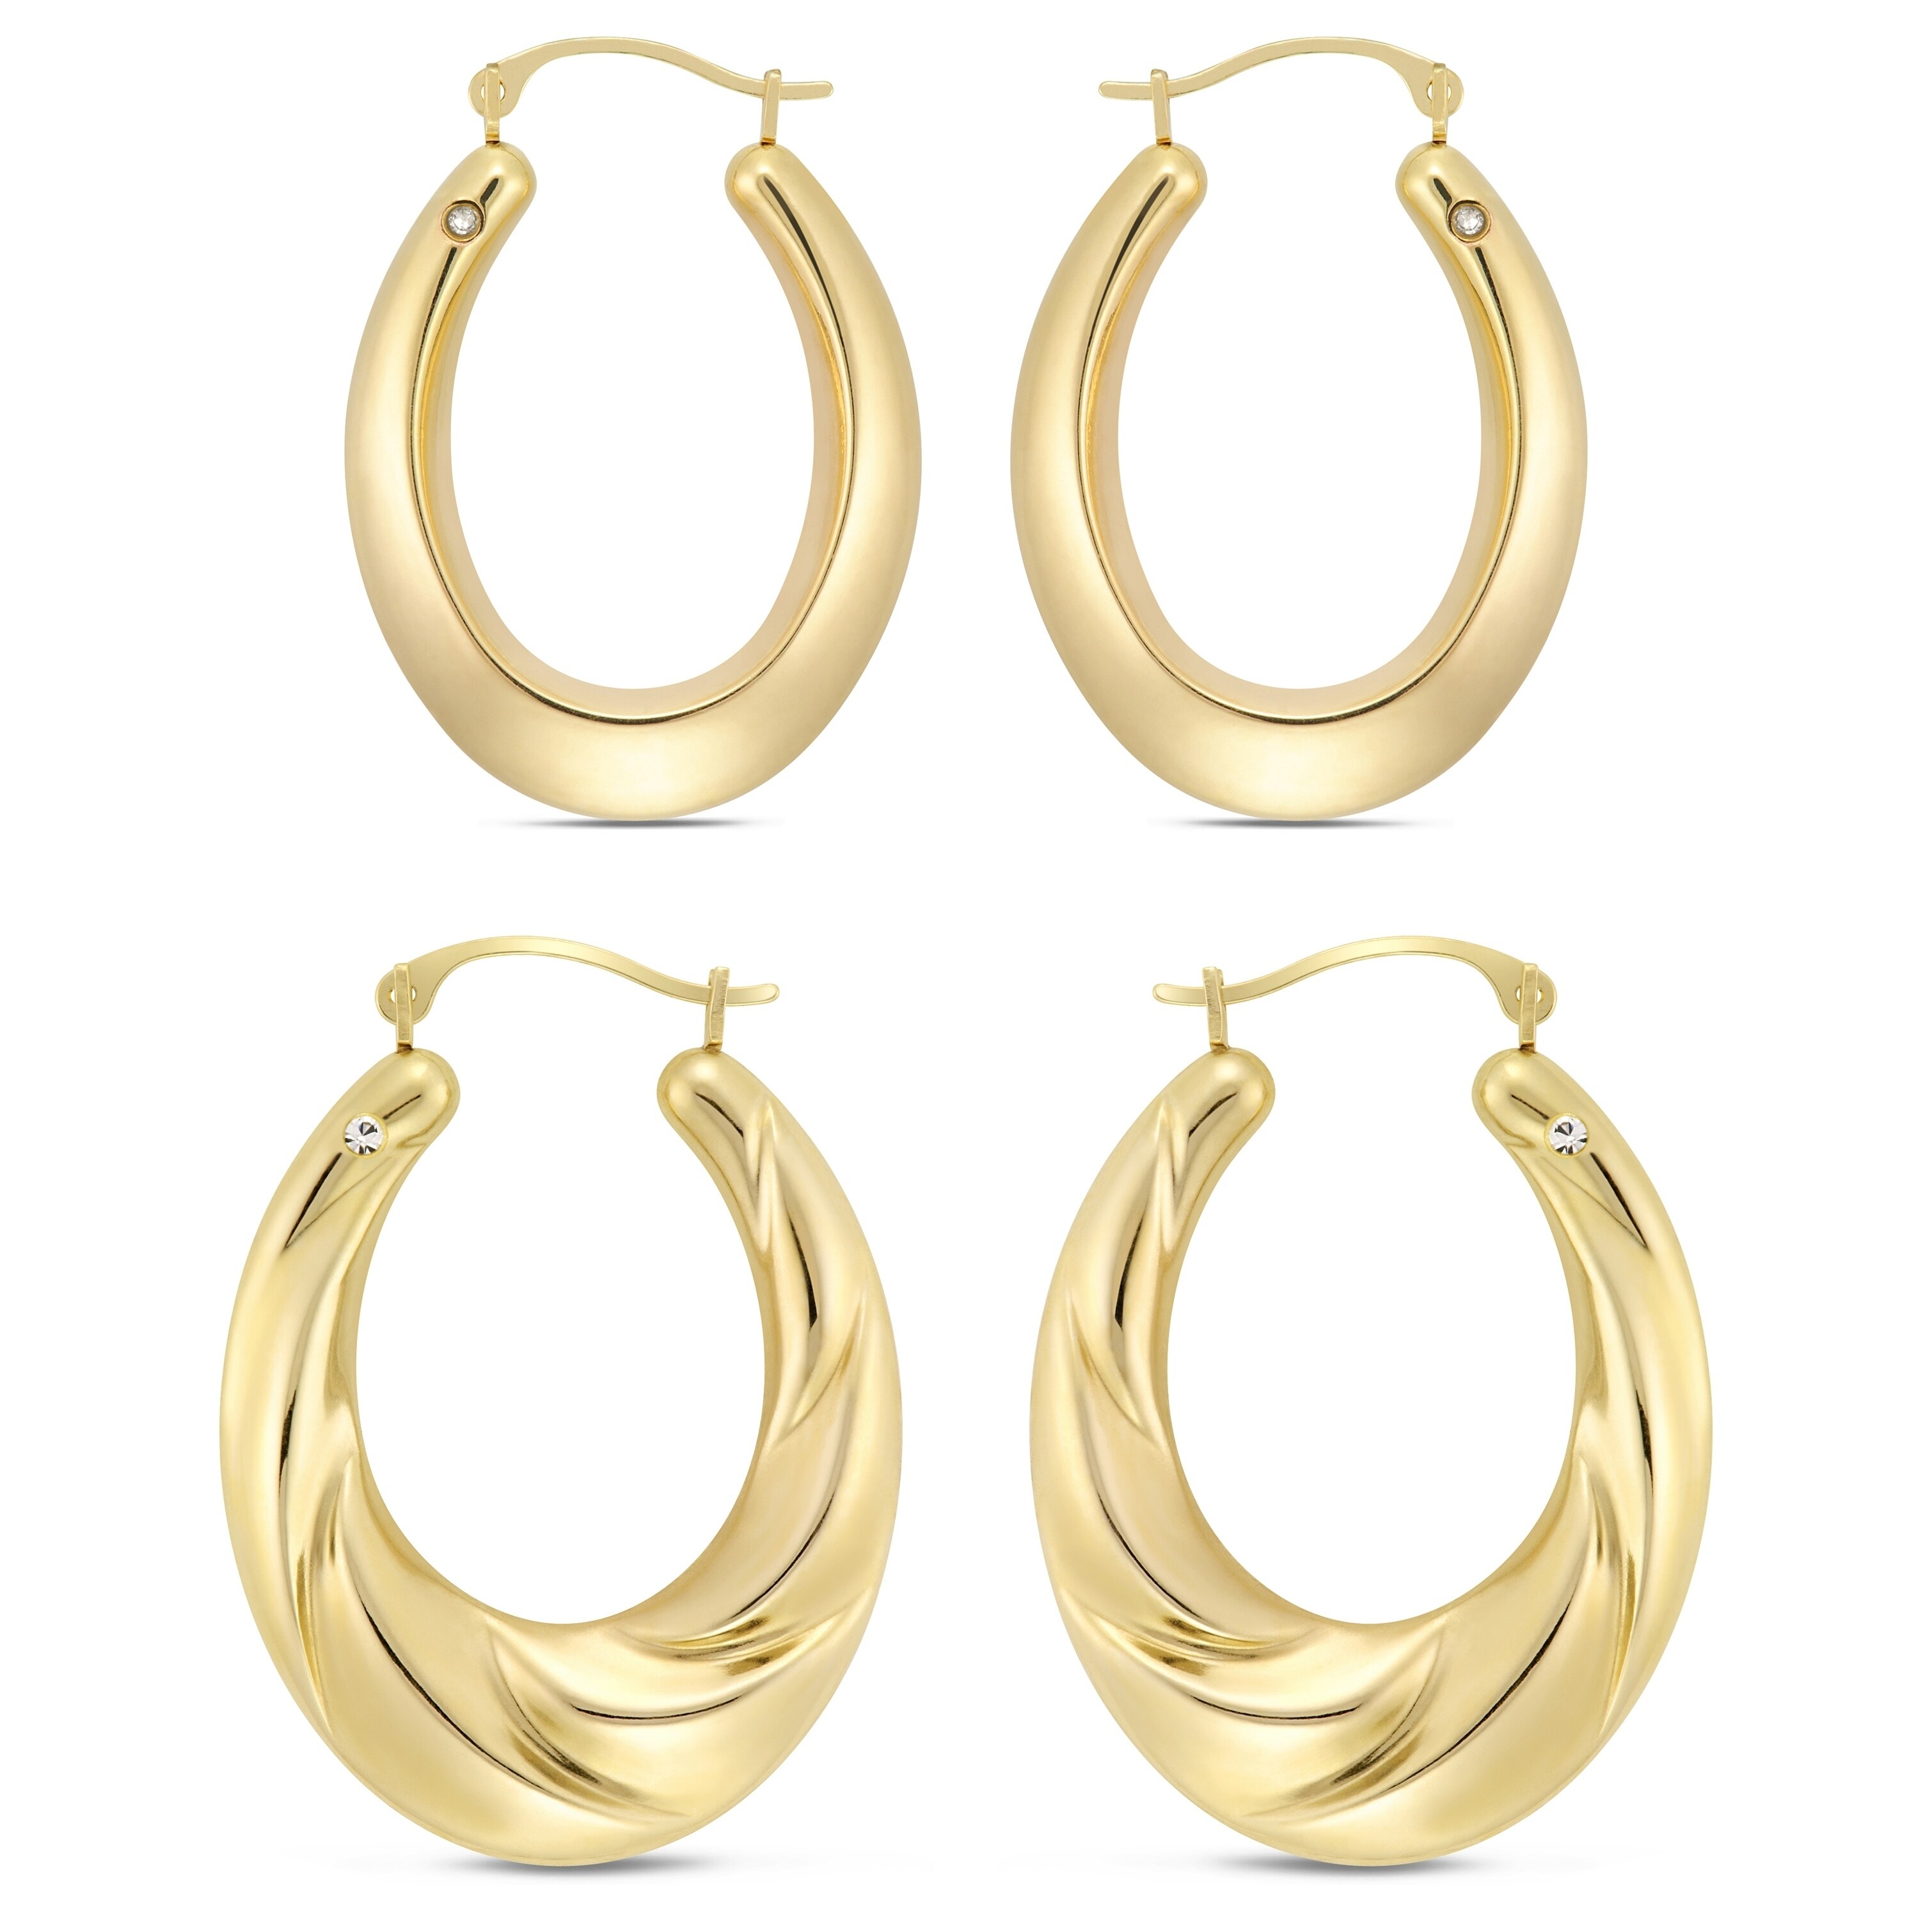 14k Textured Twisted Oval Hoop Earrings Best Quality Free Gift Box 